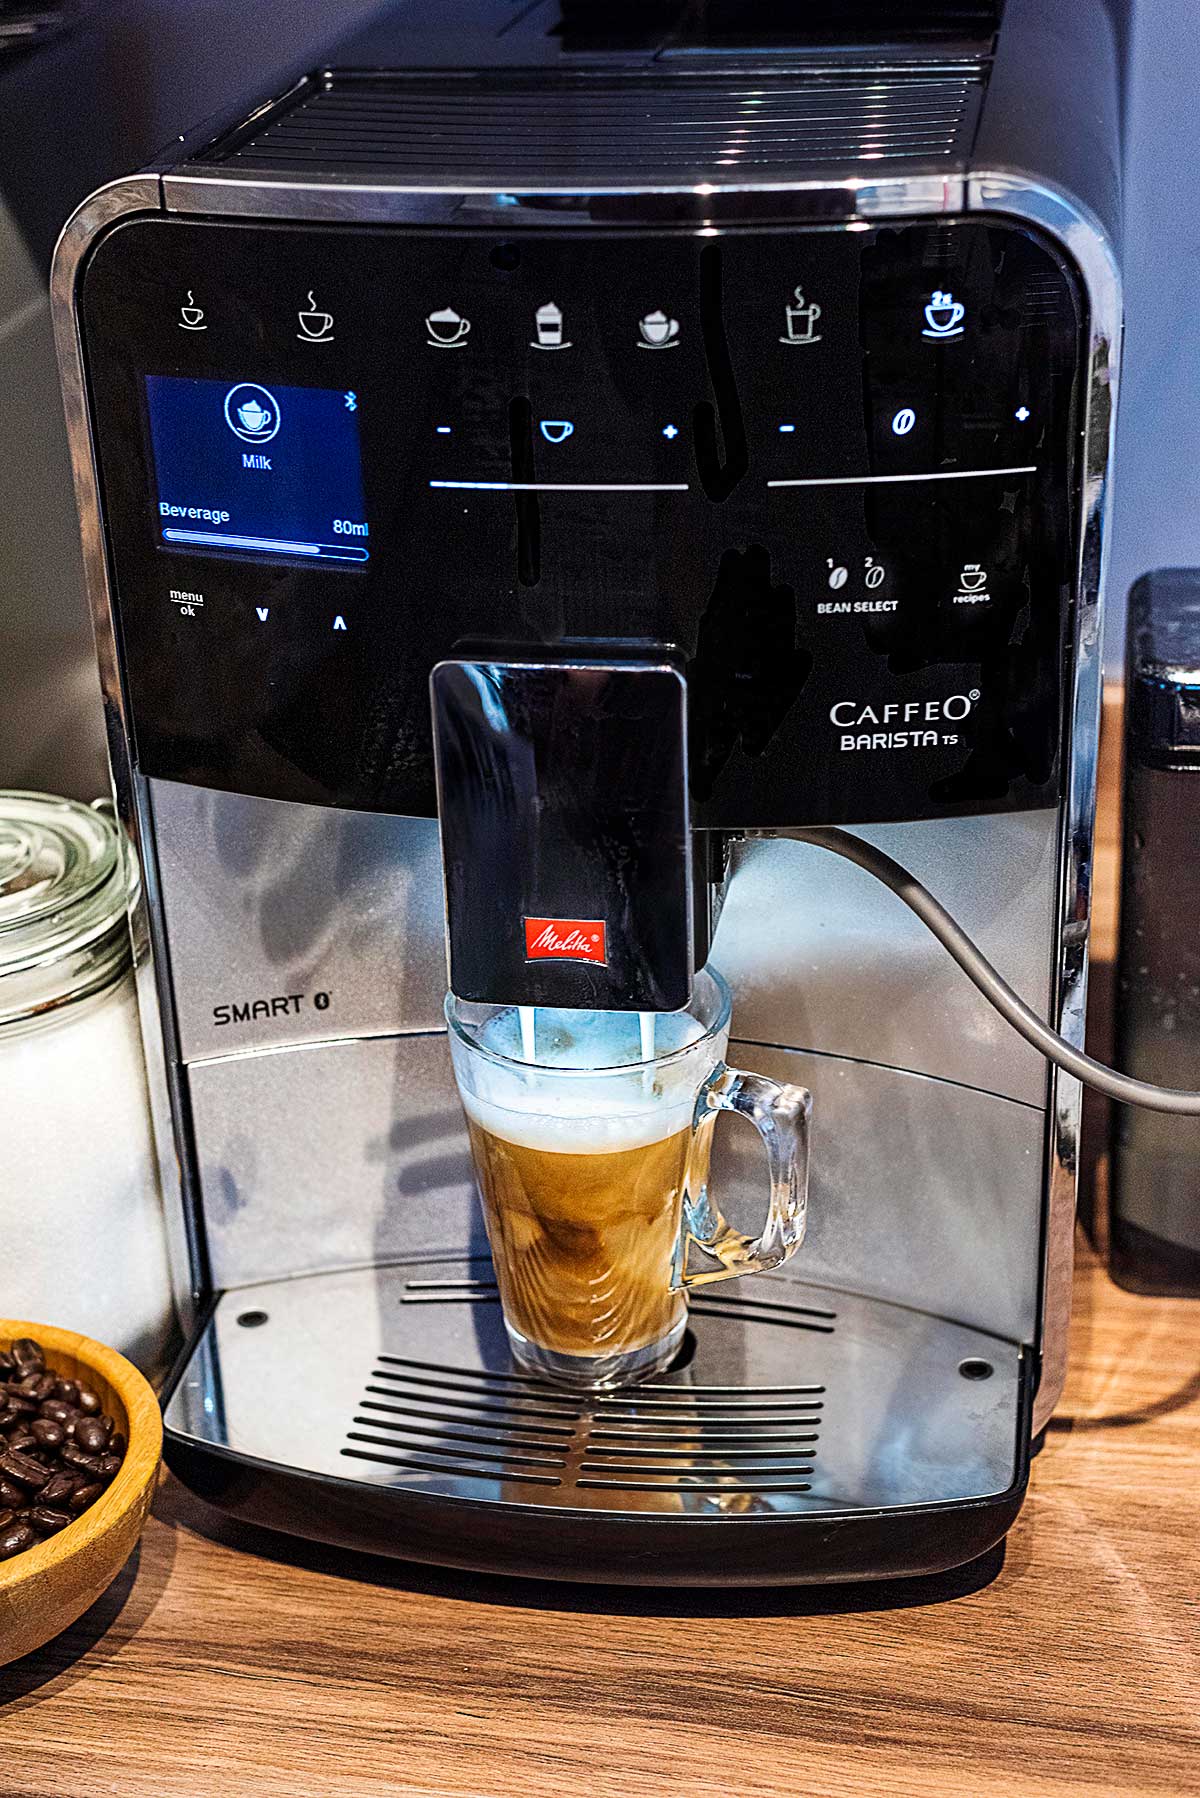 A Melitta coffee machine brewing a drink into a glass.